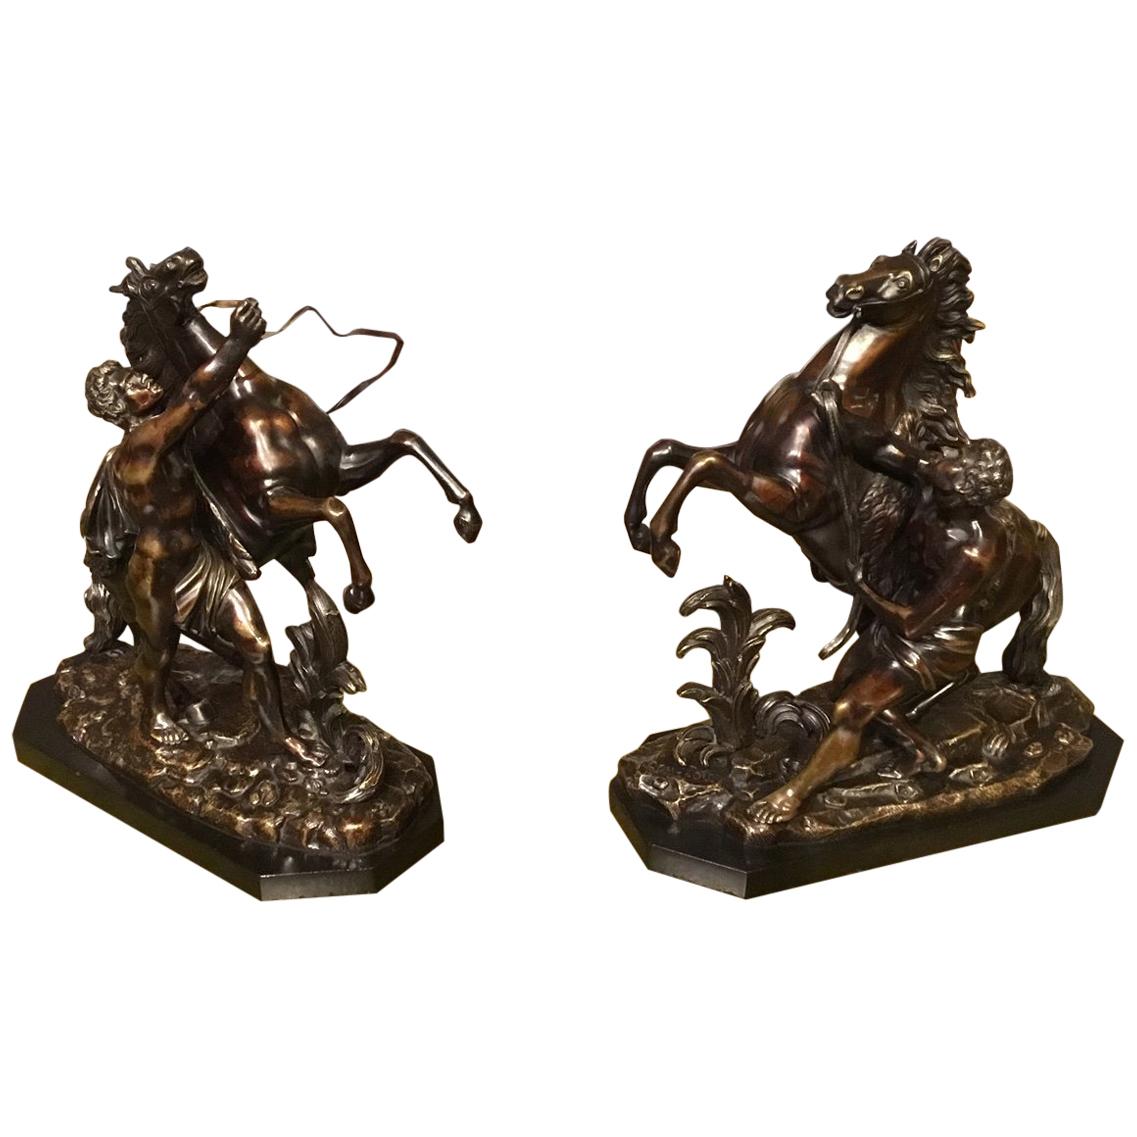 Pair of French Classical 19th Century Bronze Marley Horses after Coustou